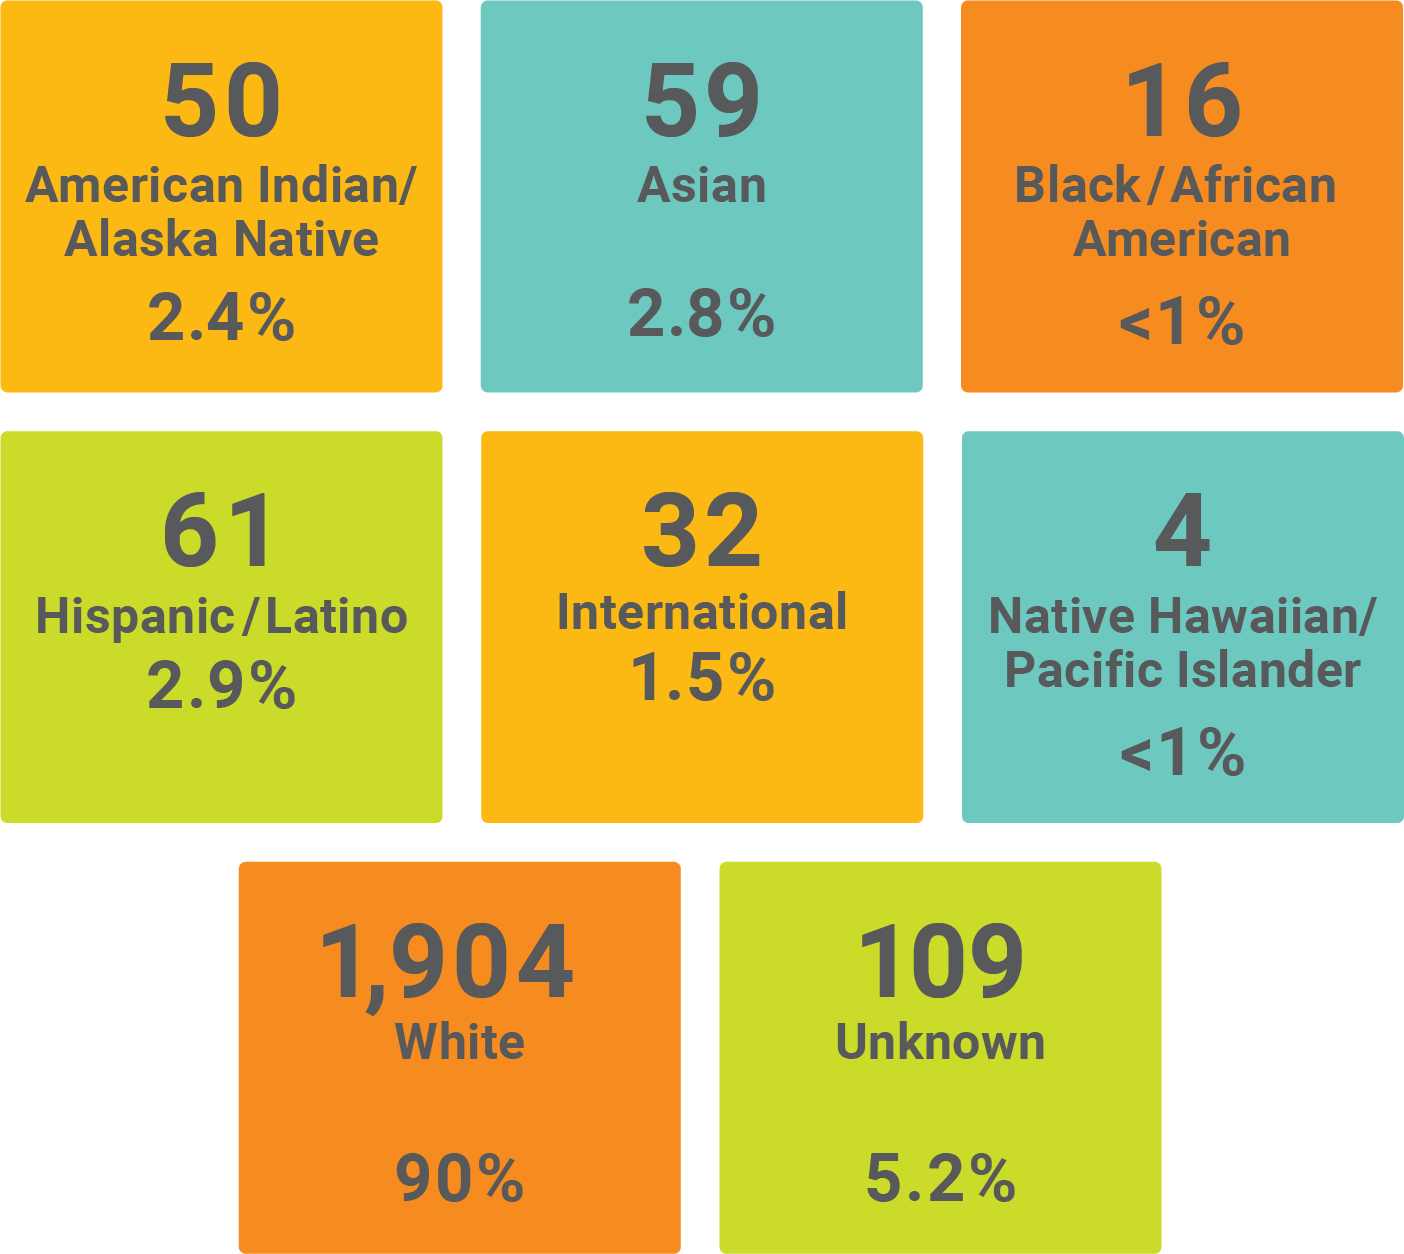 Graphic showing the demographics of staff by race and ethnicity. American Indian/Alaska Native with 50 at 2.4%, Asian with 59 at 2.8%, Black/African American with 16 at less than 1%, Hispanic/Latino with 61 at 2.93%, International with 32 at 1.5%, Native Hawaiian/Pacific Islander with 4 at less than 1%, White with 1,904 at 90%, and Unknown with 109 at 5.2%. 